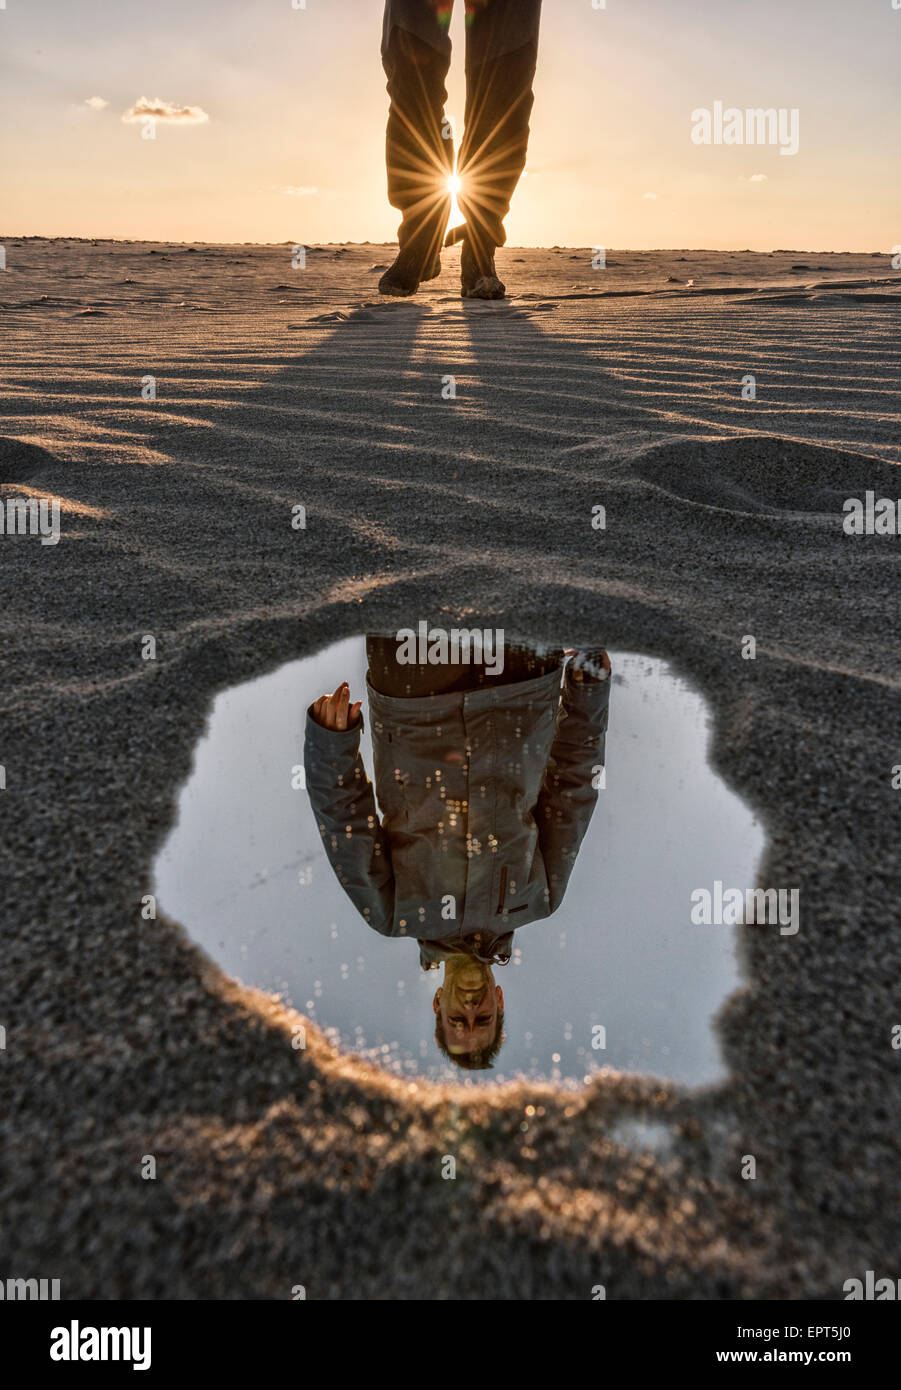 Reflection of a man. Stock Photo